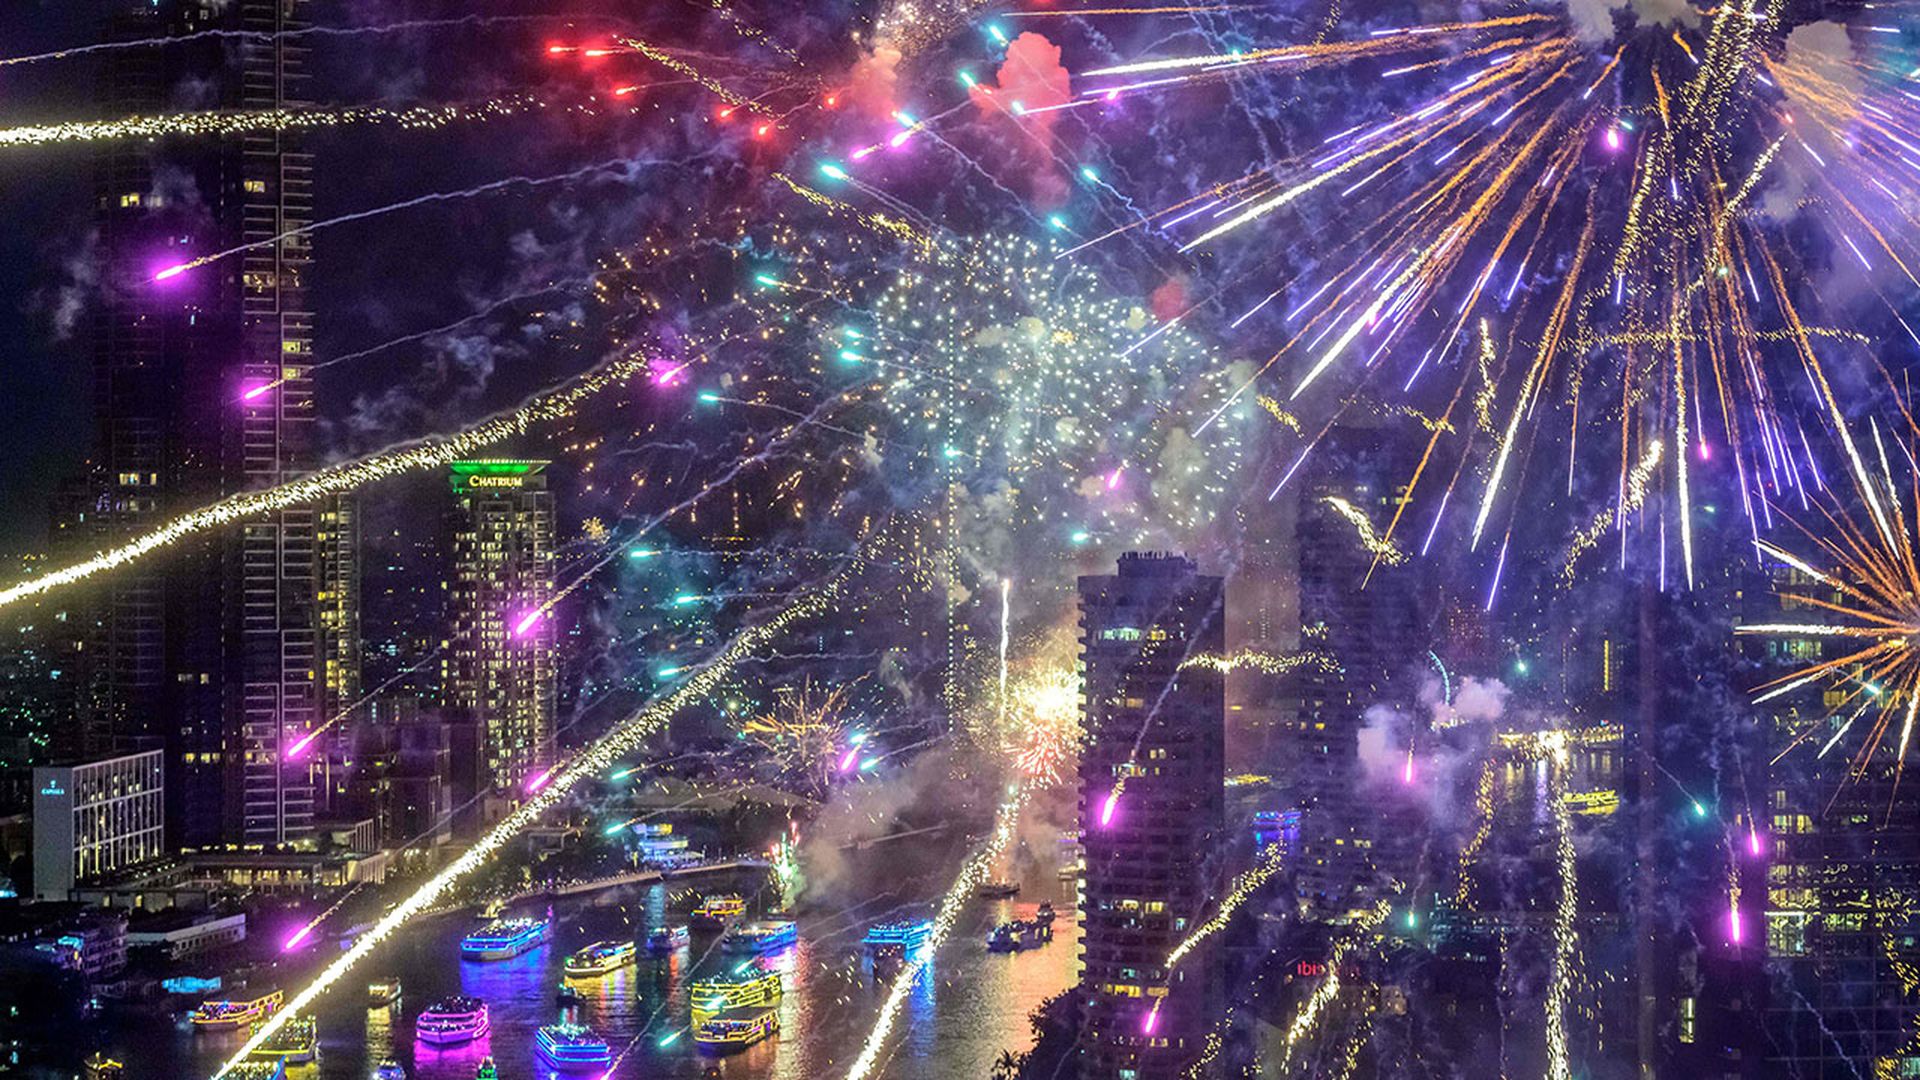 New Year's Eve fireworks erupt over the Chao Phraya river during the fireworks show in Bangkok on January 1, 2021.